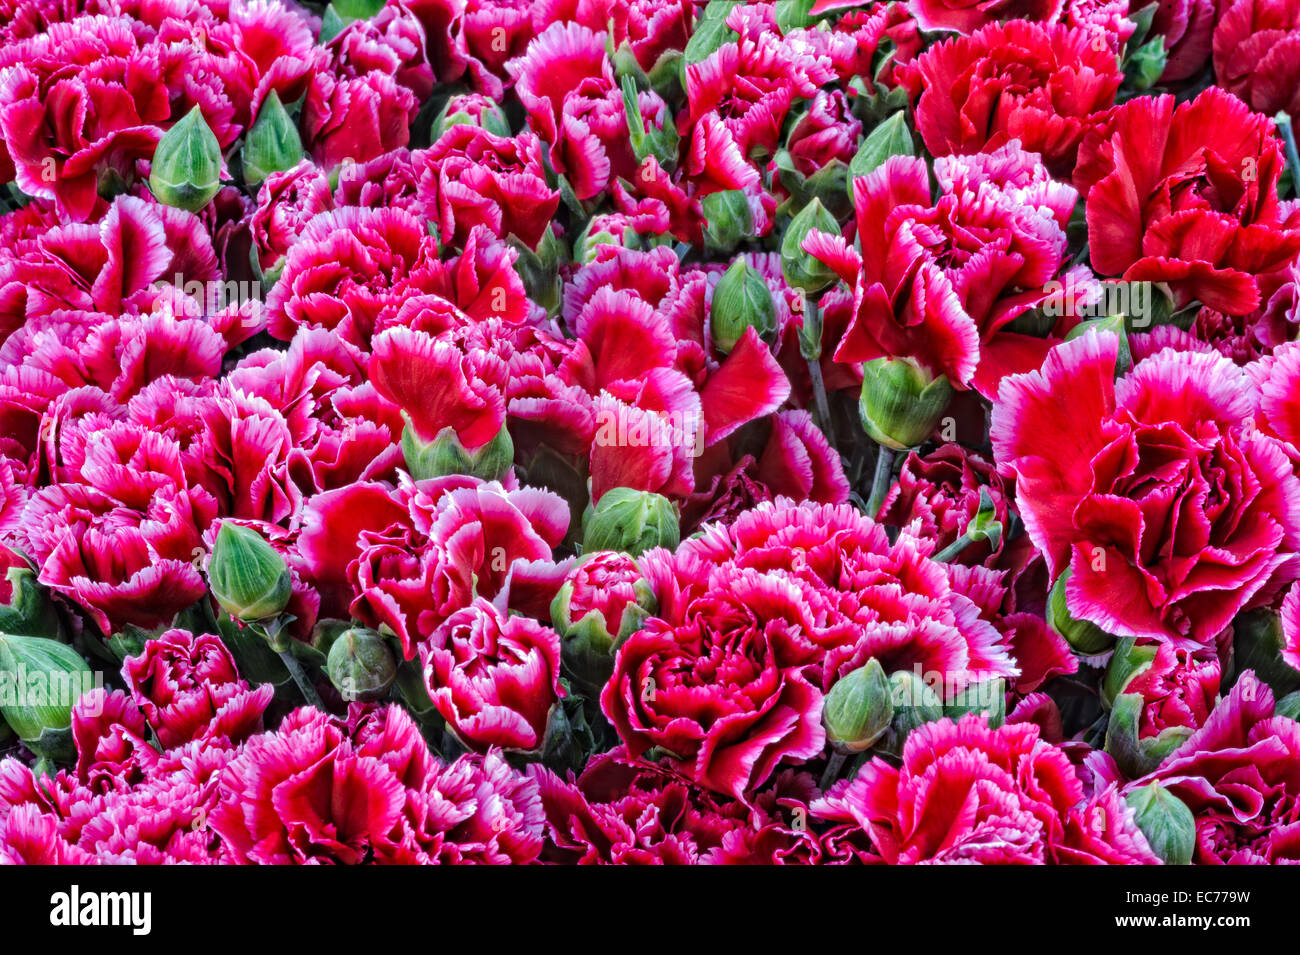 Texture from pink red carnation flowers, Turkish karanfil Stock Photo